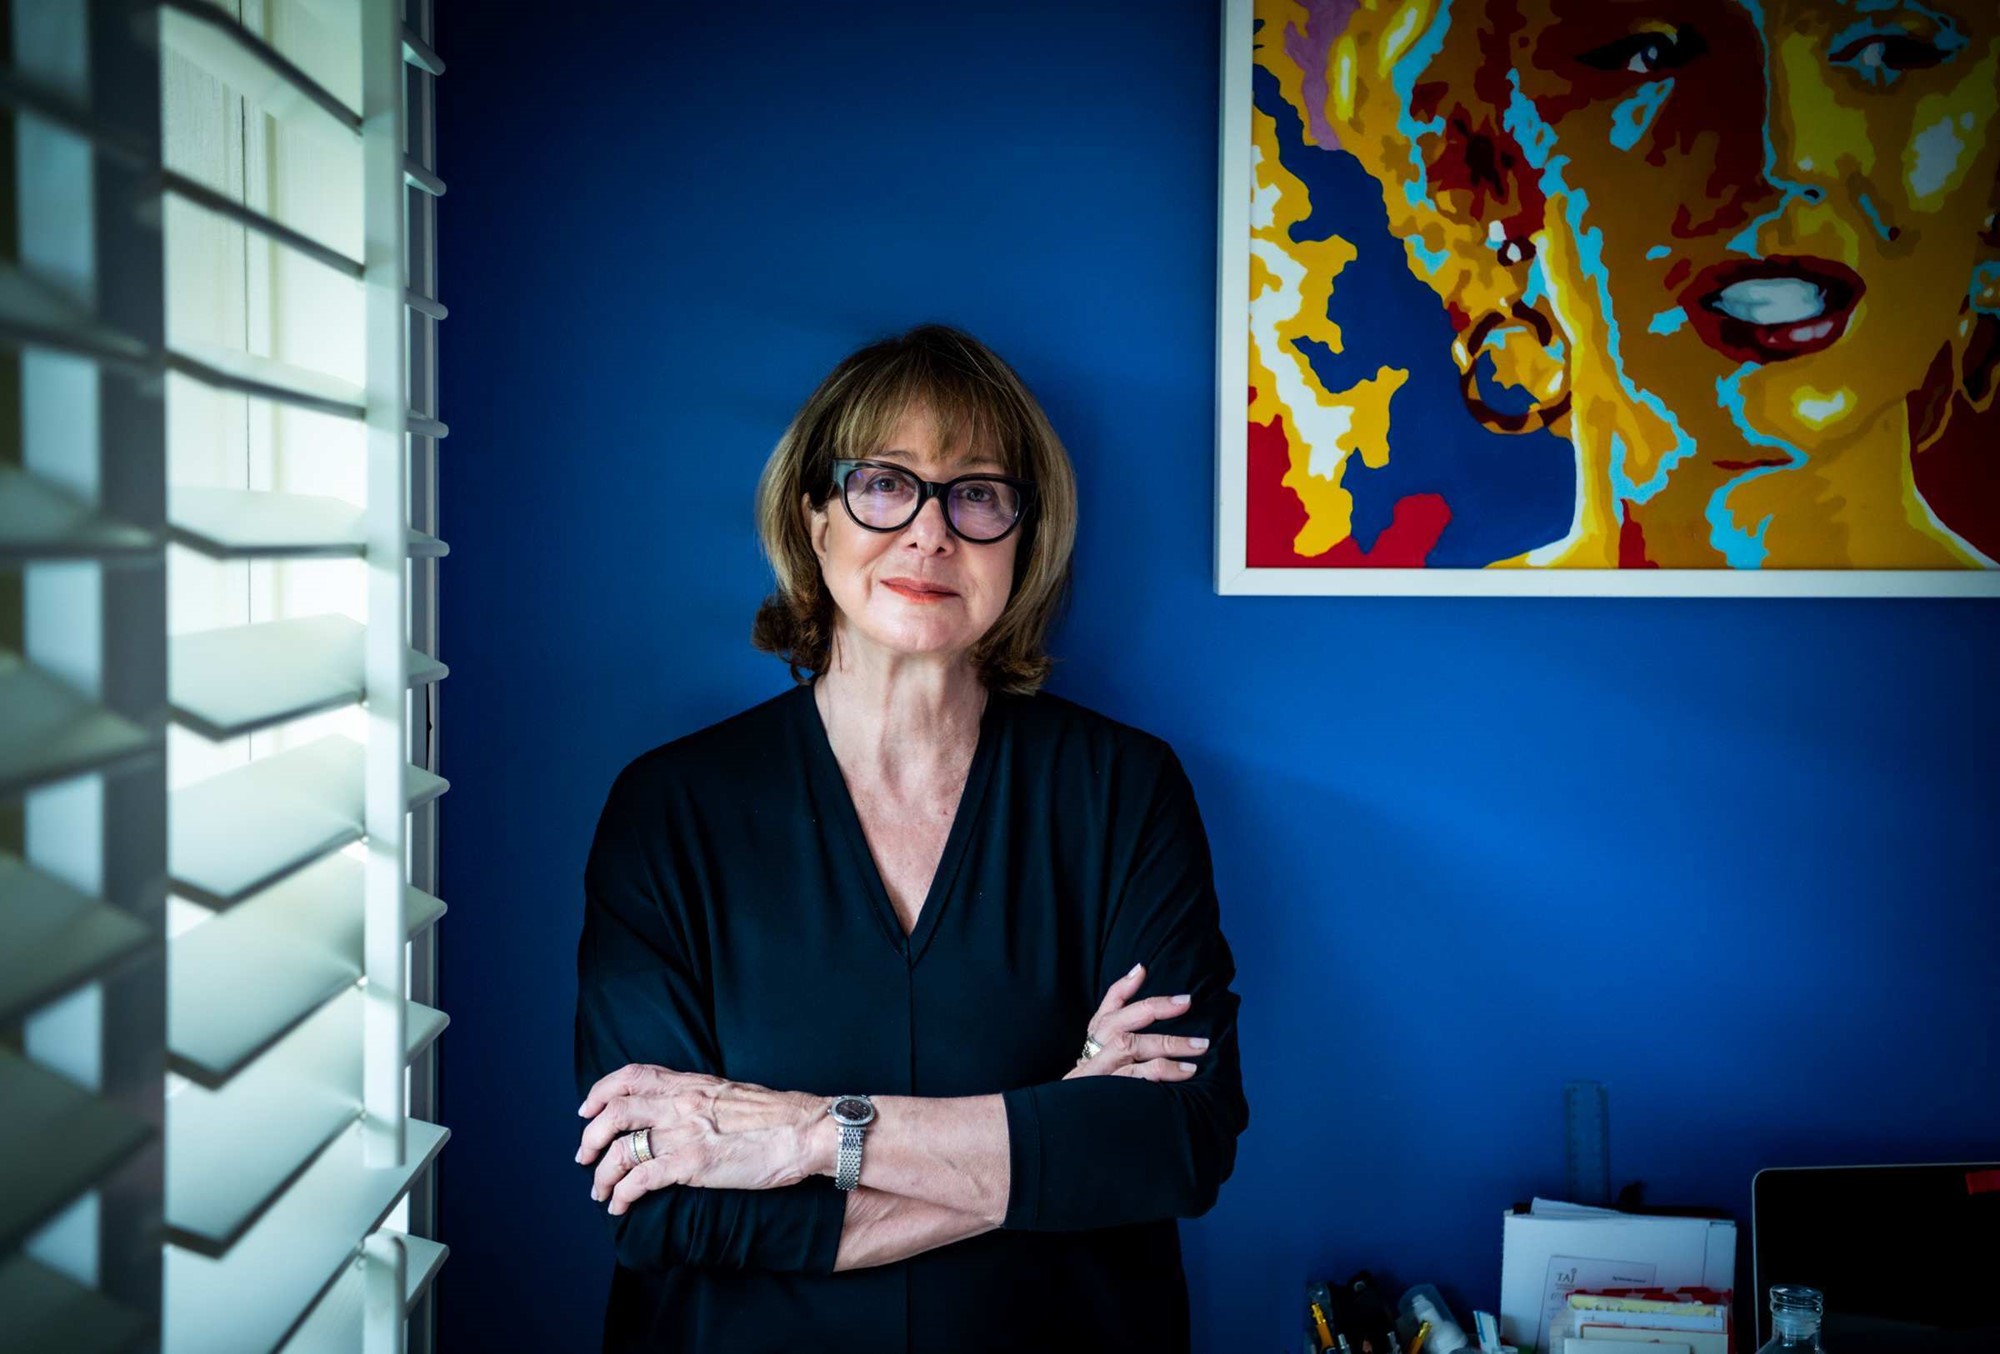 A woman with glasses leans against a dark blue wall